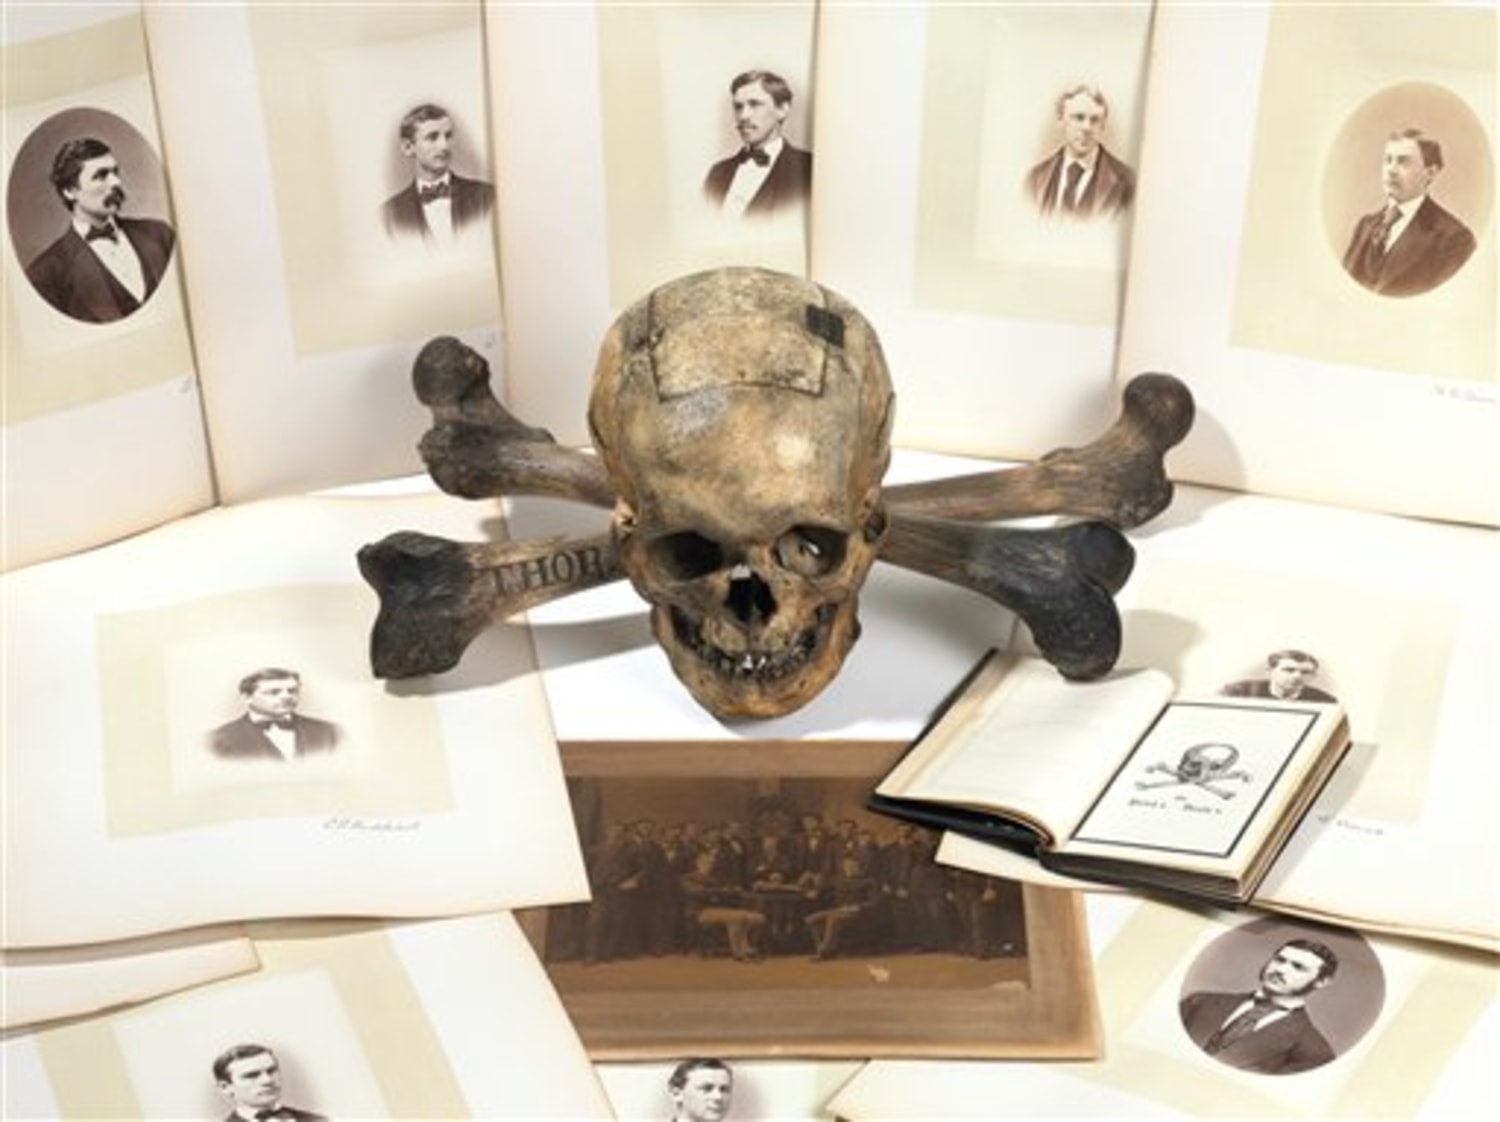 Skull and Bones members from the class of 1869. - Yale University Library